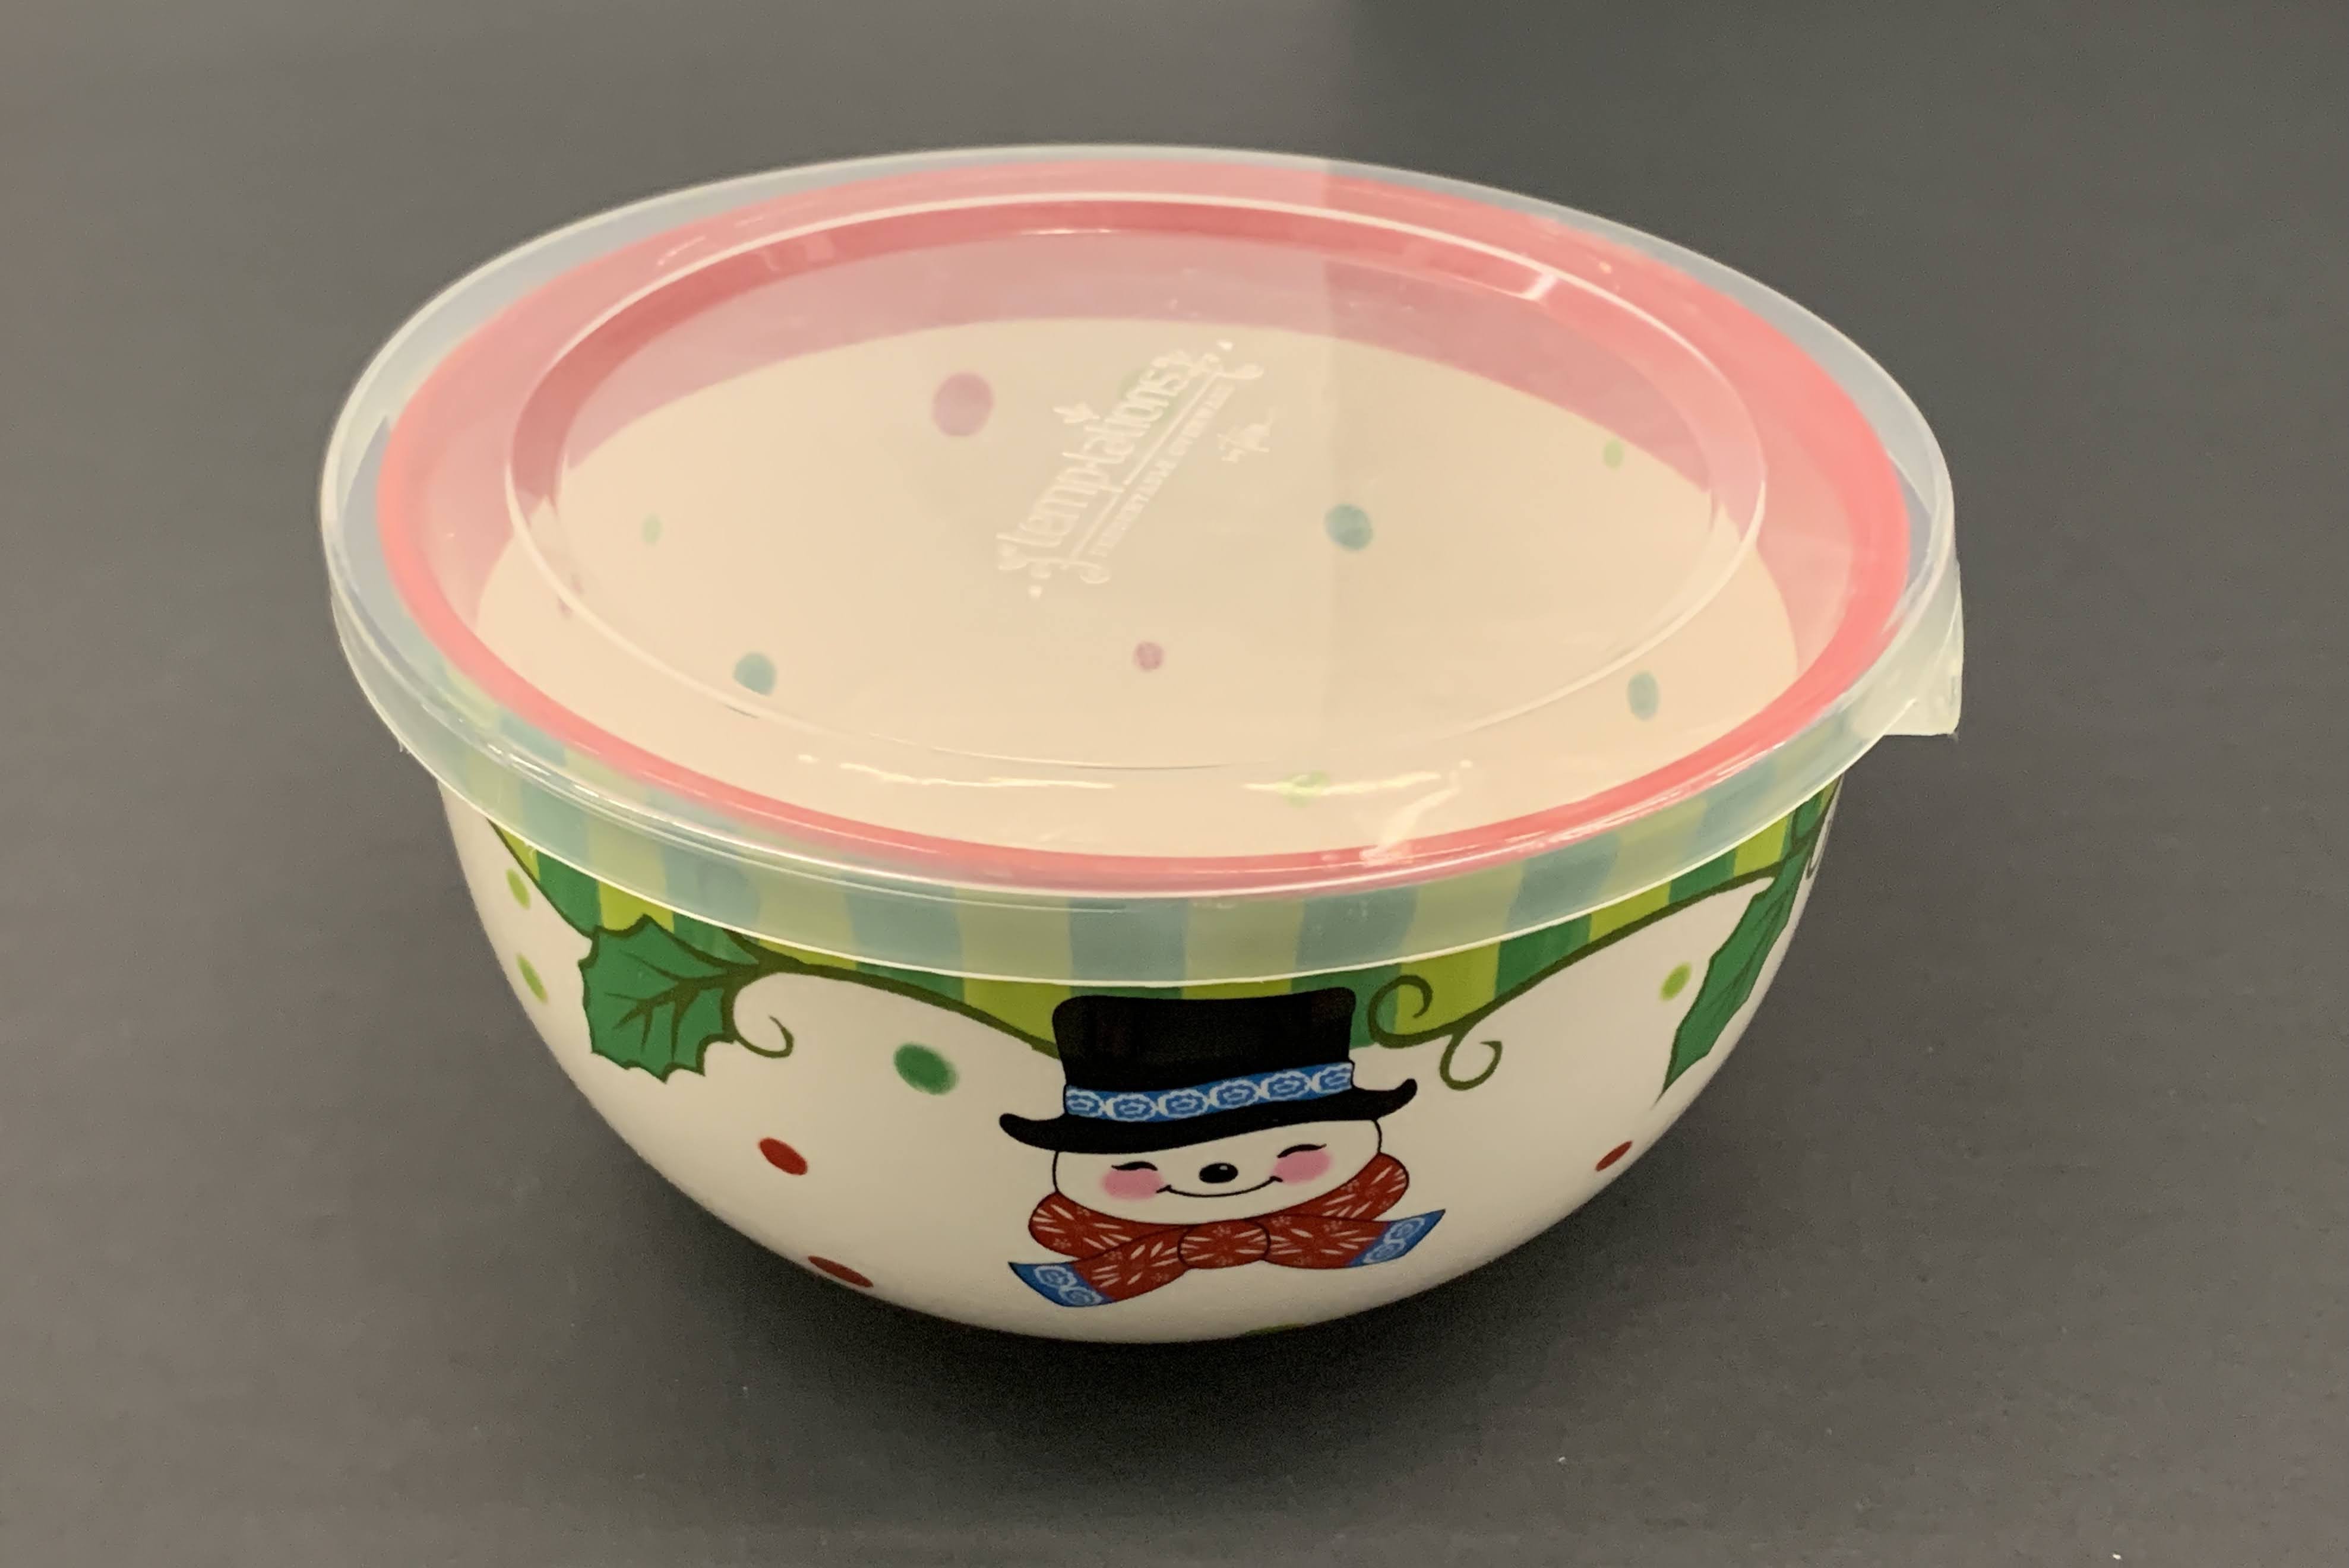 Holiday Swonman Pattern - Ceramic Porcelain Cookie Bowl With Plastic Lid - 7"